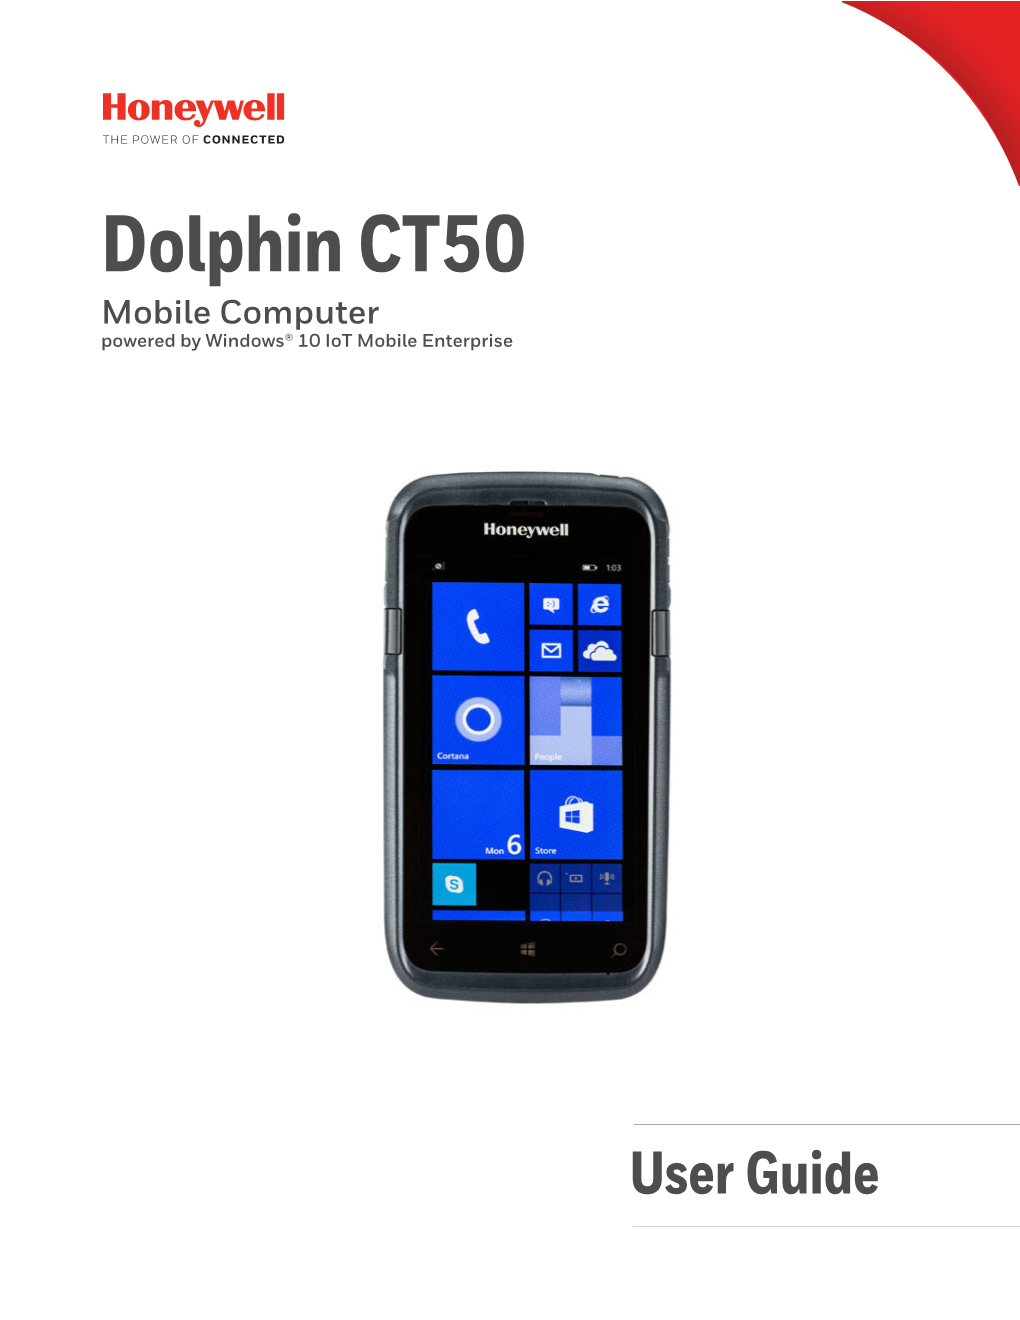 Dolphin CT50 Mobile Computer Powered by Windows® 10 Iot Mobile Enterprise